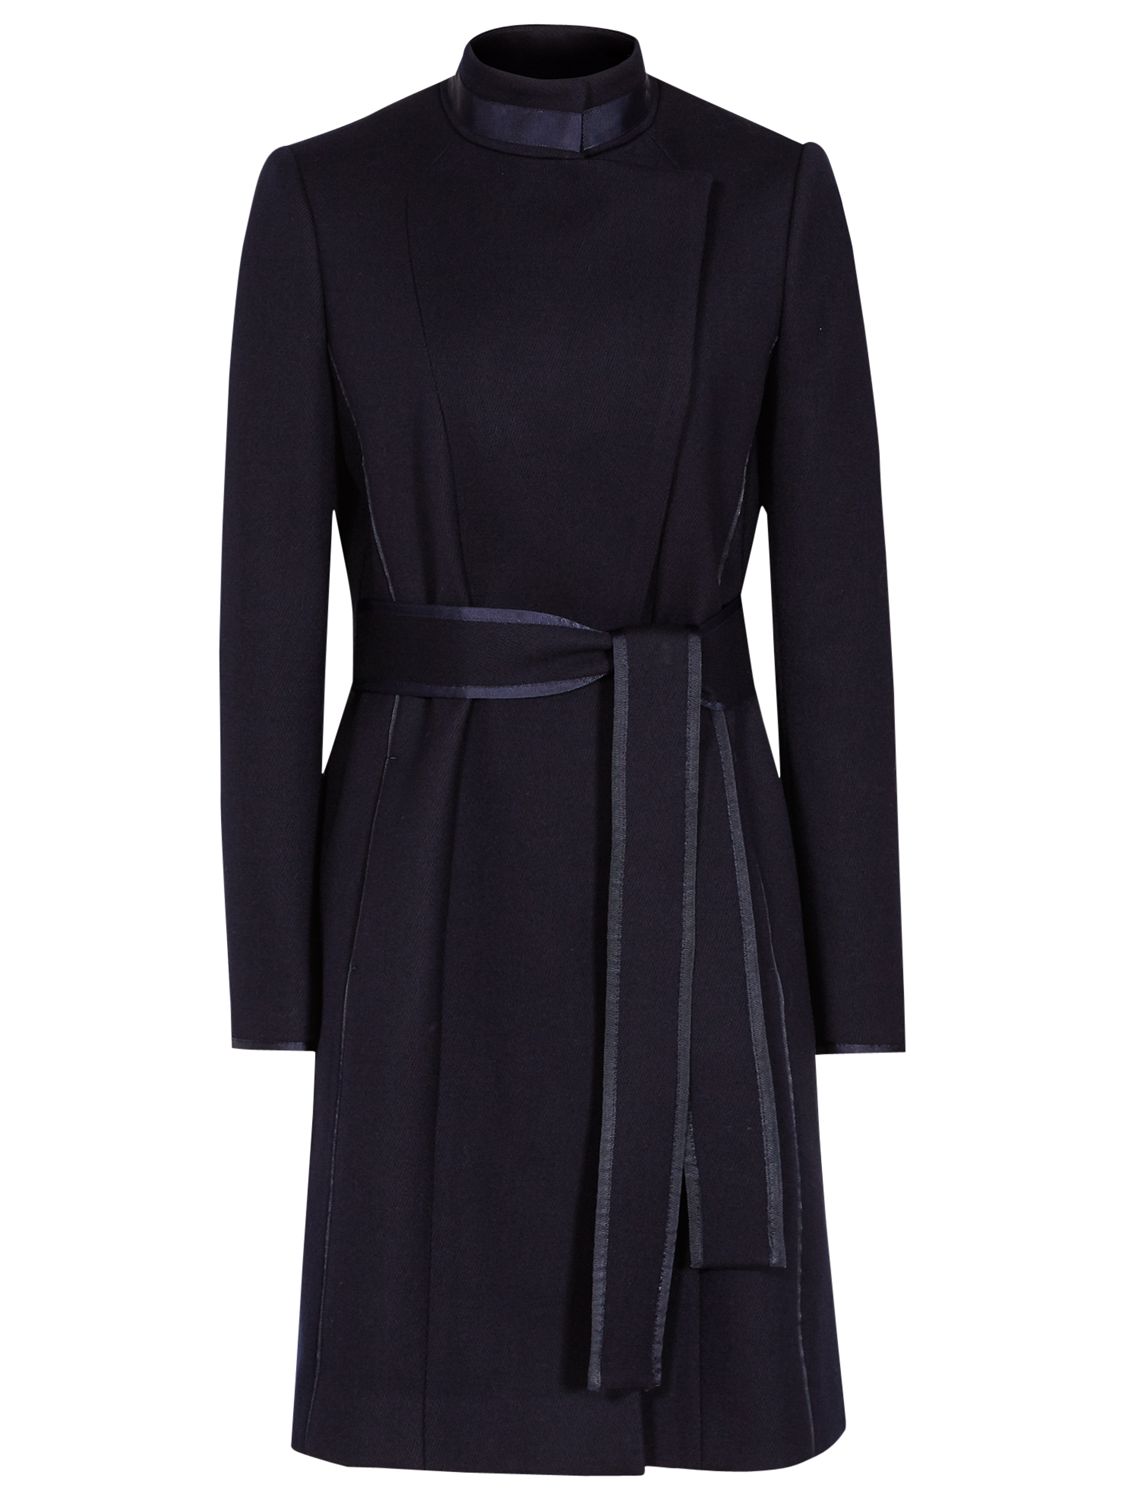 Reiss Lucille Belted Long Wool Coat, Navy at John Lewis & Partners